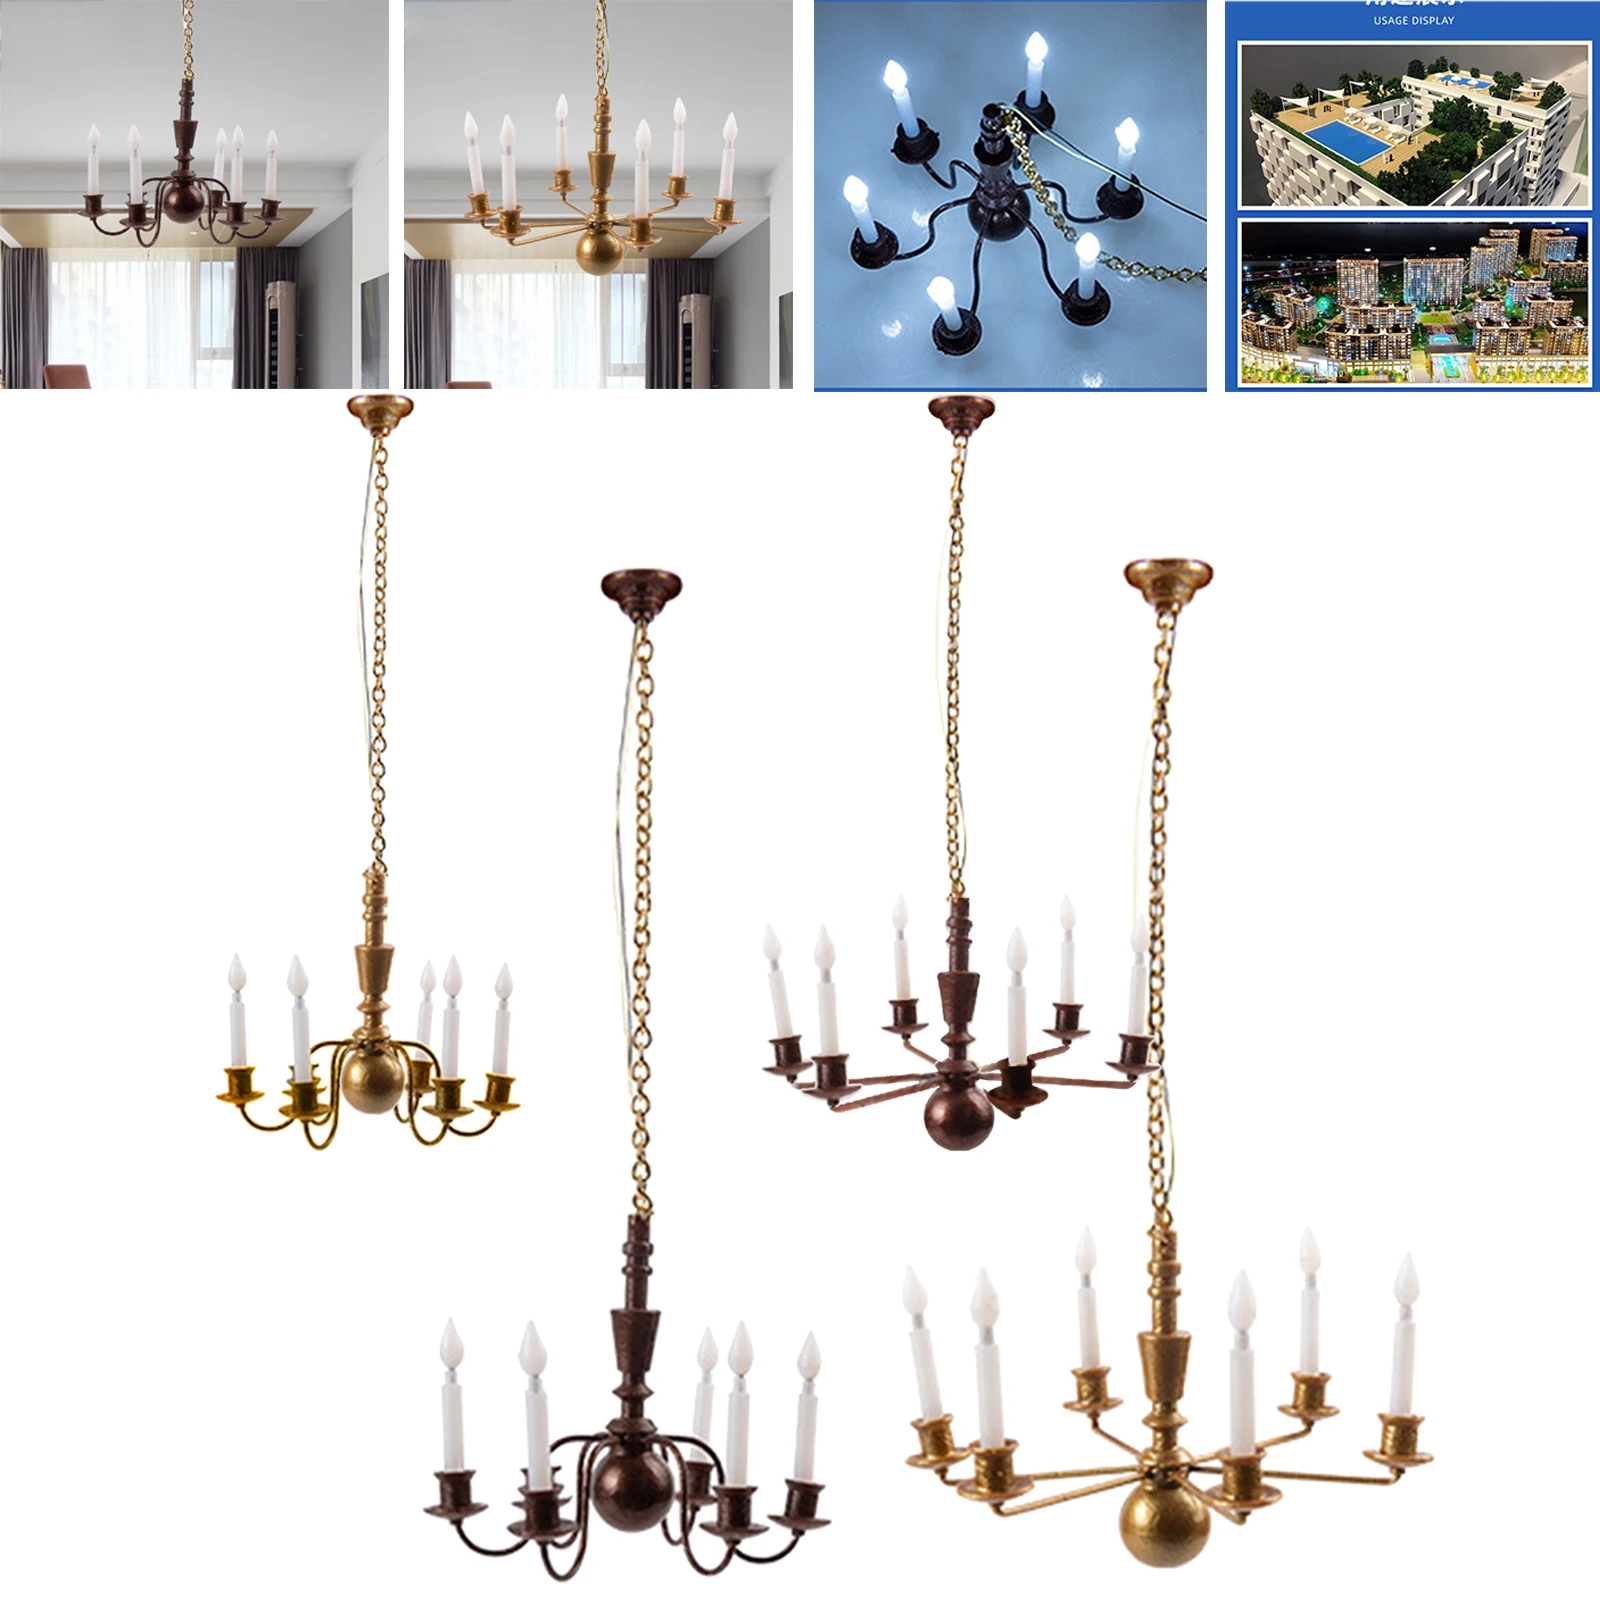 Classic Metal 1:87 HO Scale Ceiling Light Hanging Chandelier DIY Model Toy